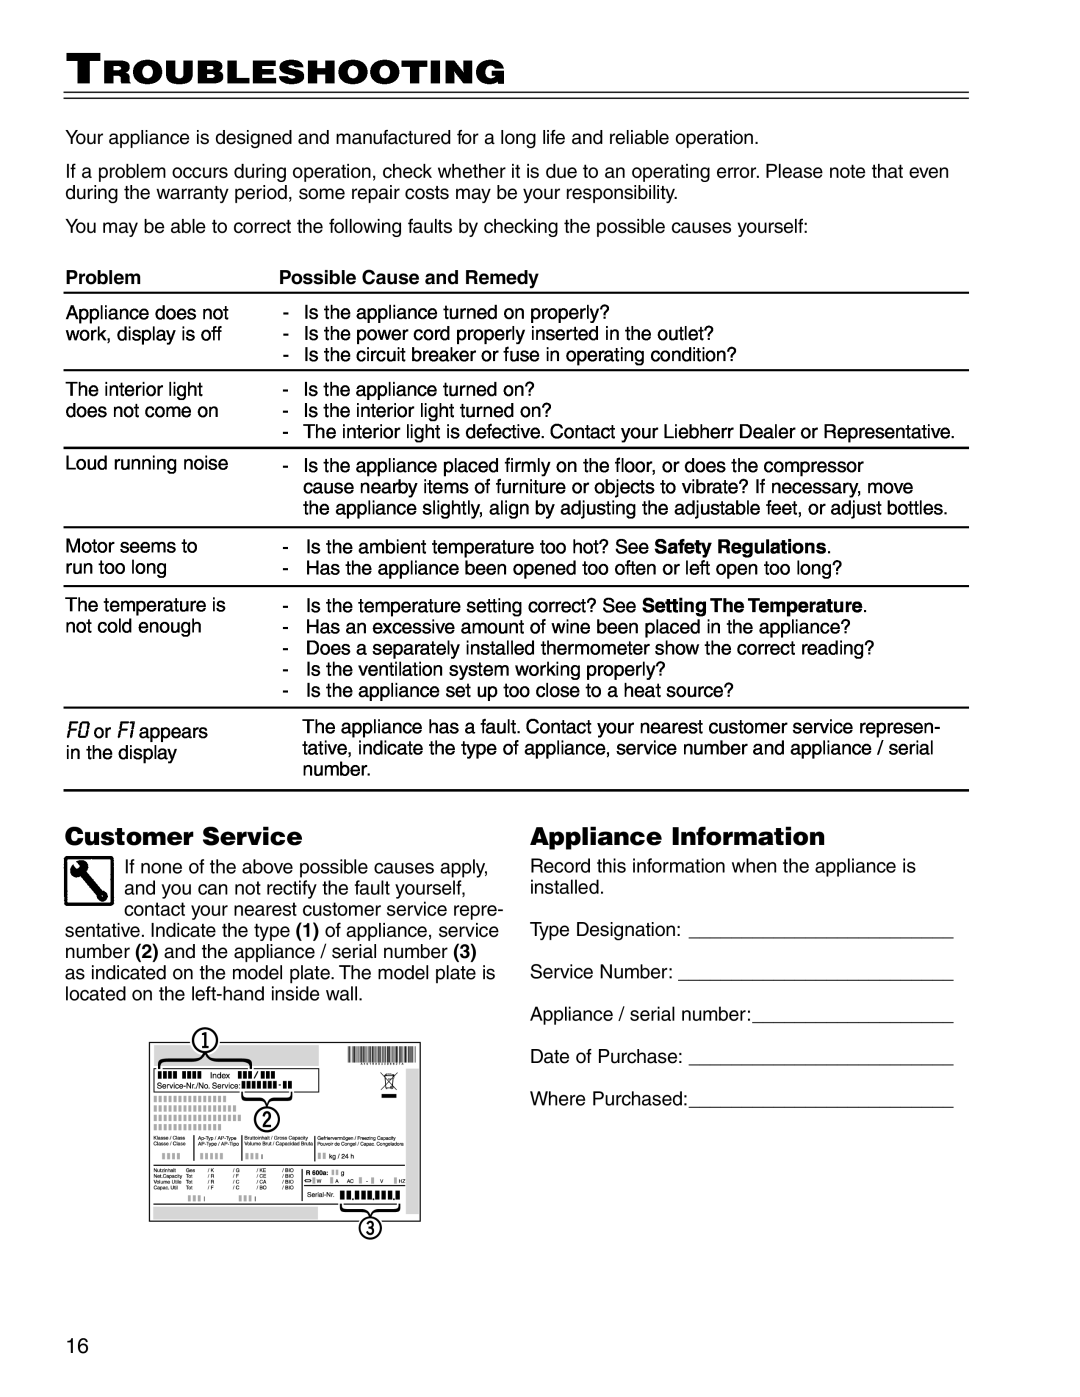 Liebherr WS14300 manual Troubleshooting, Customer Service, Appliance Information 